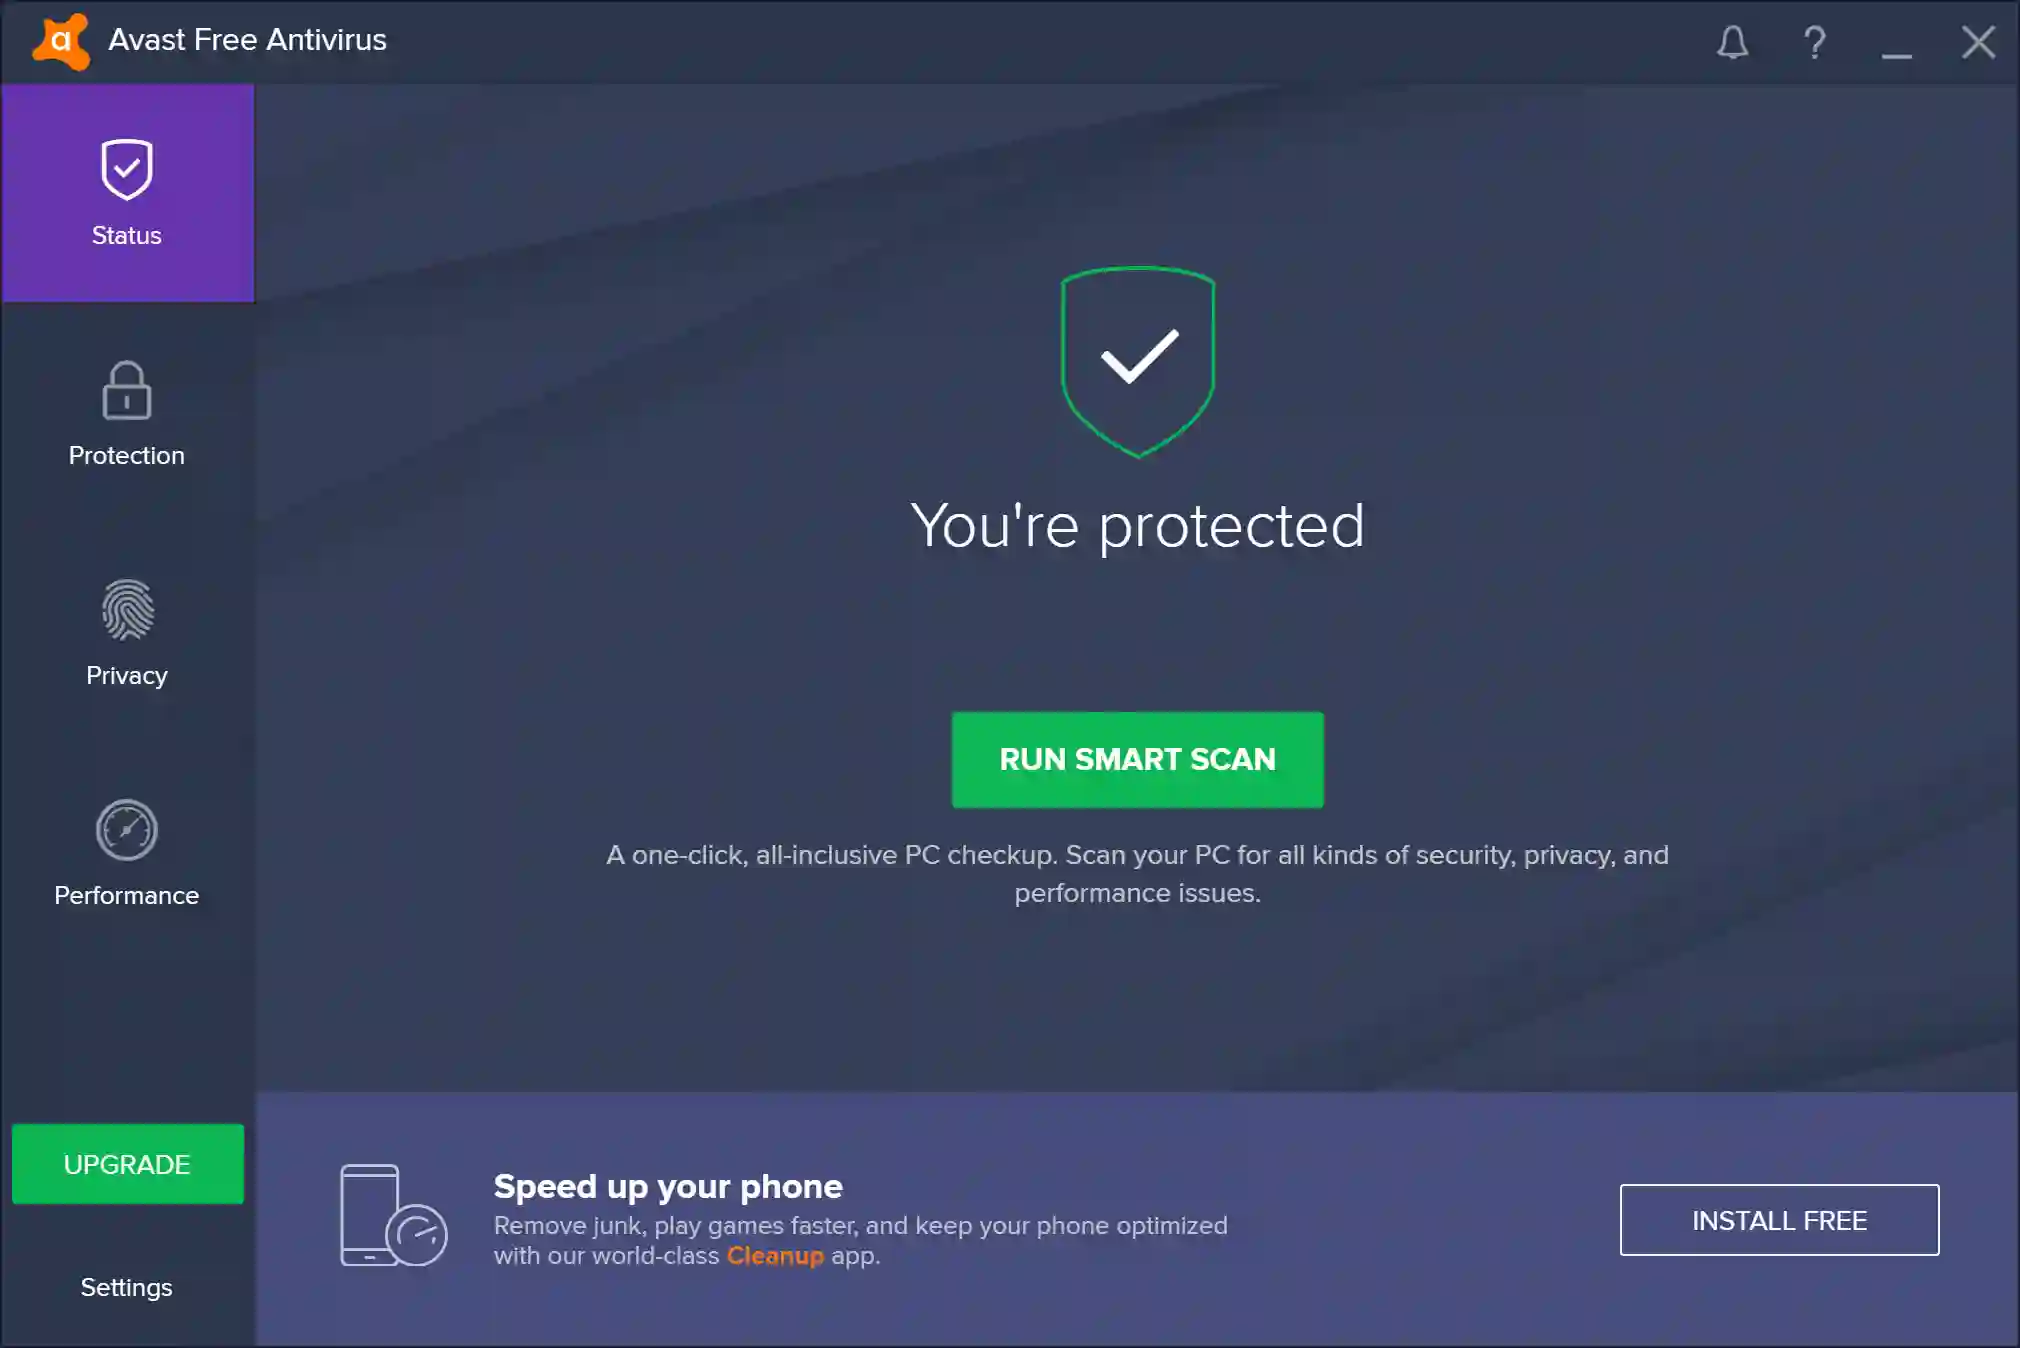 Is Avast Good for Mac?